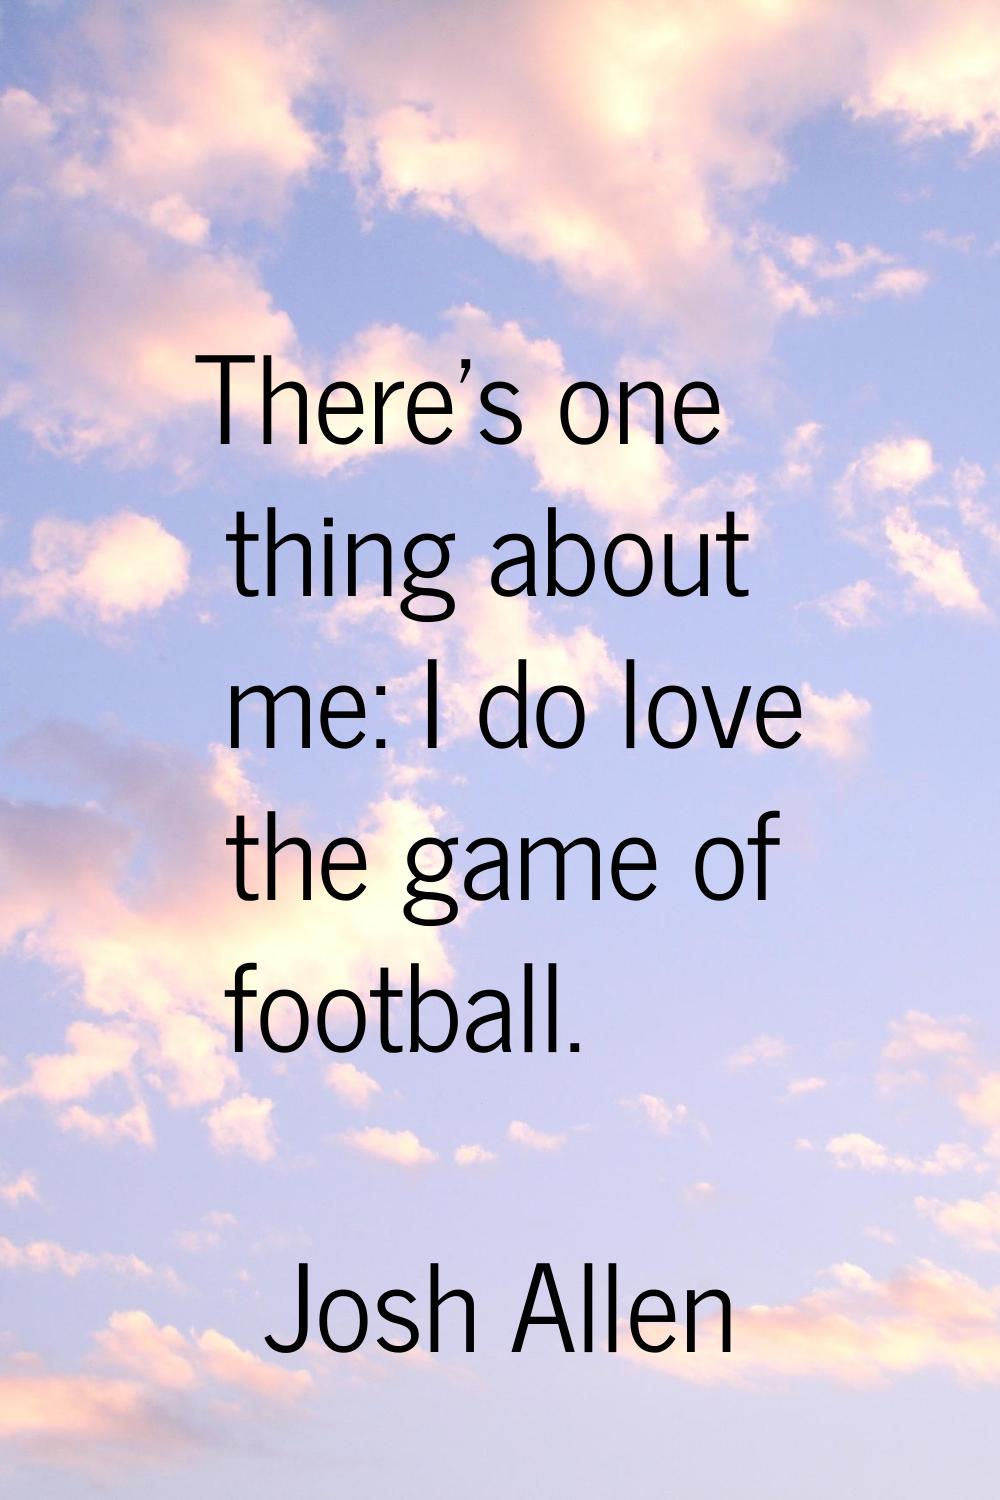 There's one thing about me: I do love the game of football.